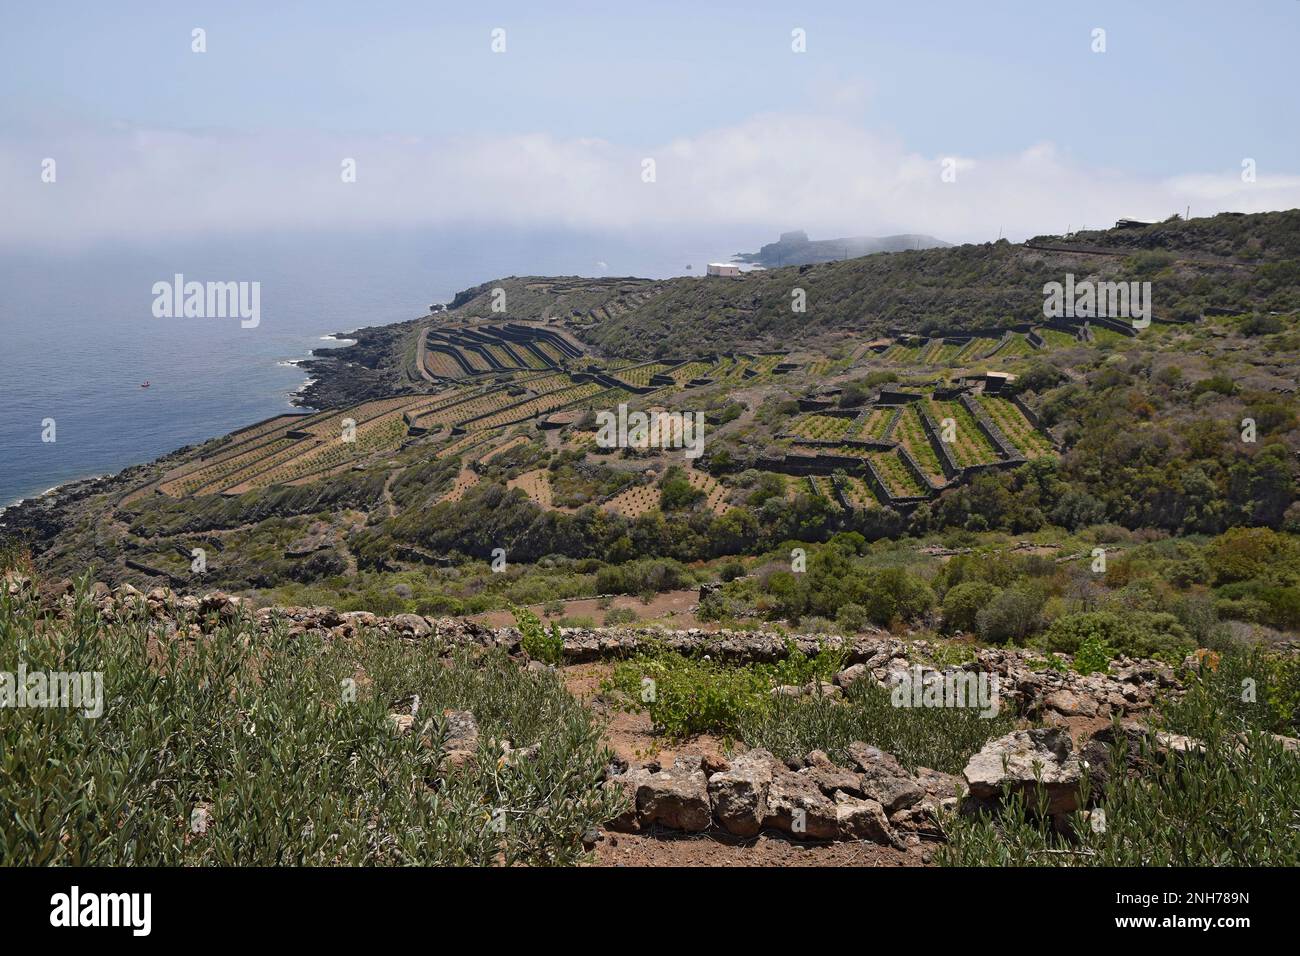 Panoramic view with Mediterranean vegetation and agricultural terraces, Pantelleria Stock Photo